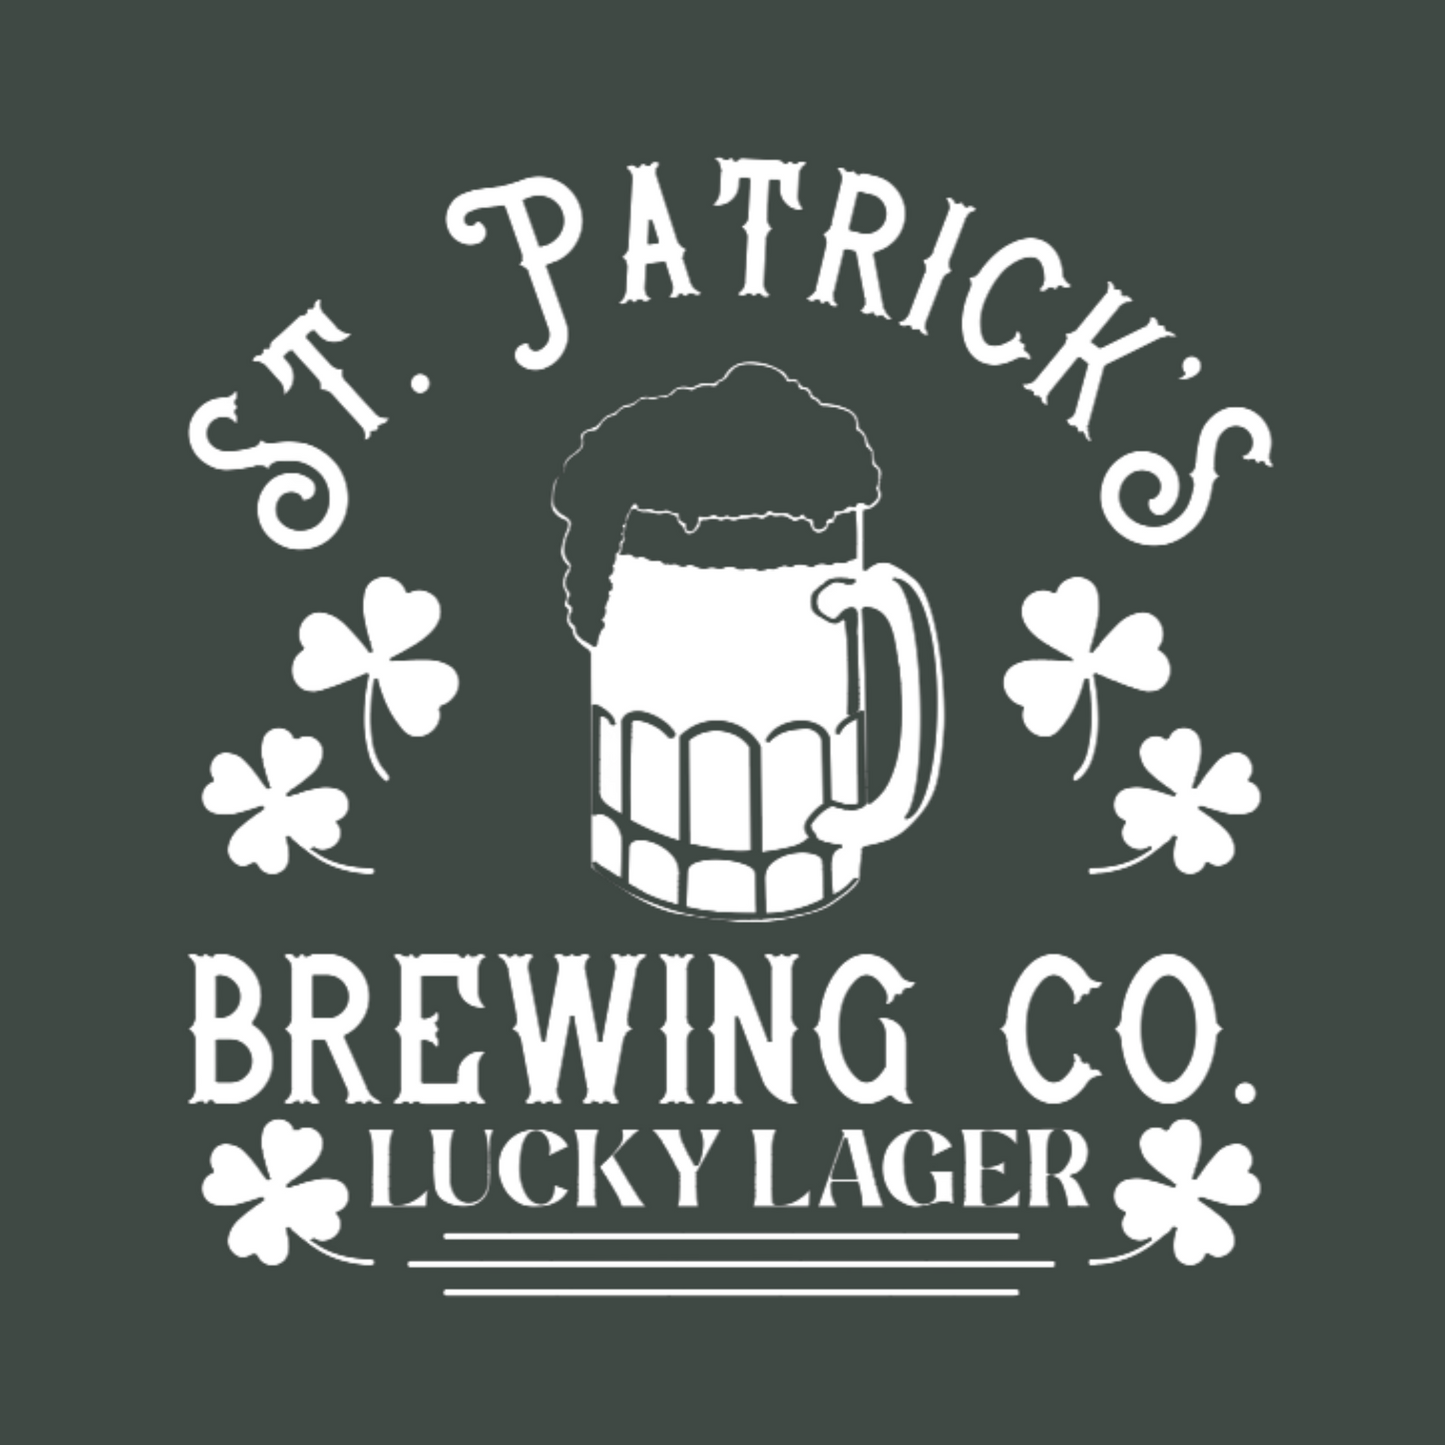 St. Patricks Brewing Co. T-Shirt in heather forest. The front has a white design with the saying "St. Patrick's Brewing Co. Lucky Lager" with a glass of beer and four leaf clovers surrounding the saying. This is an image of the front design up close view in white on a green background.